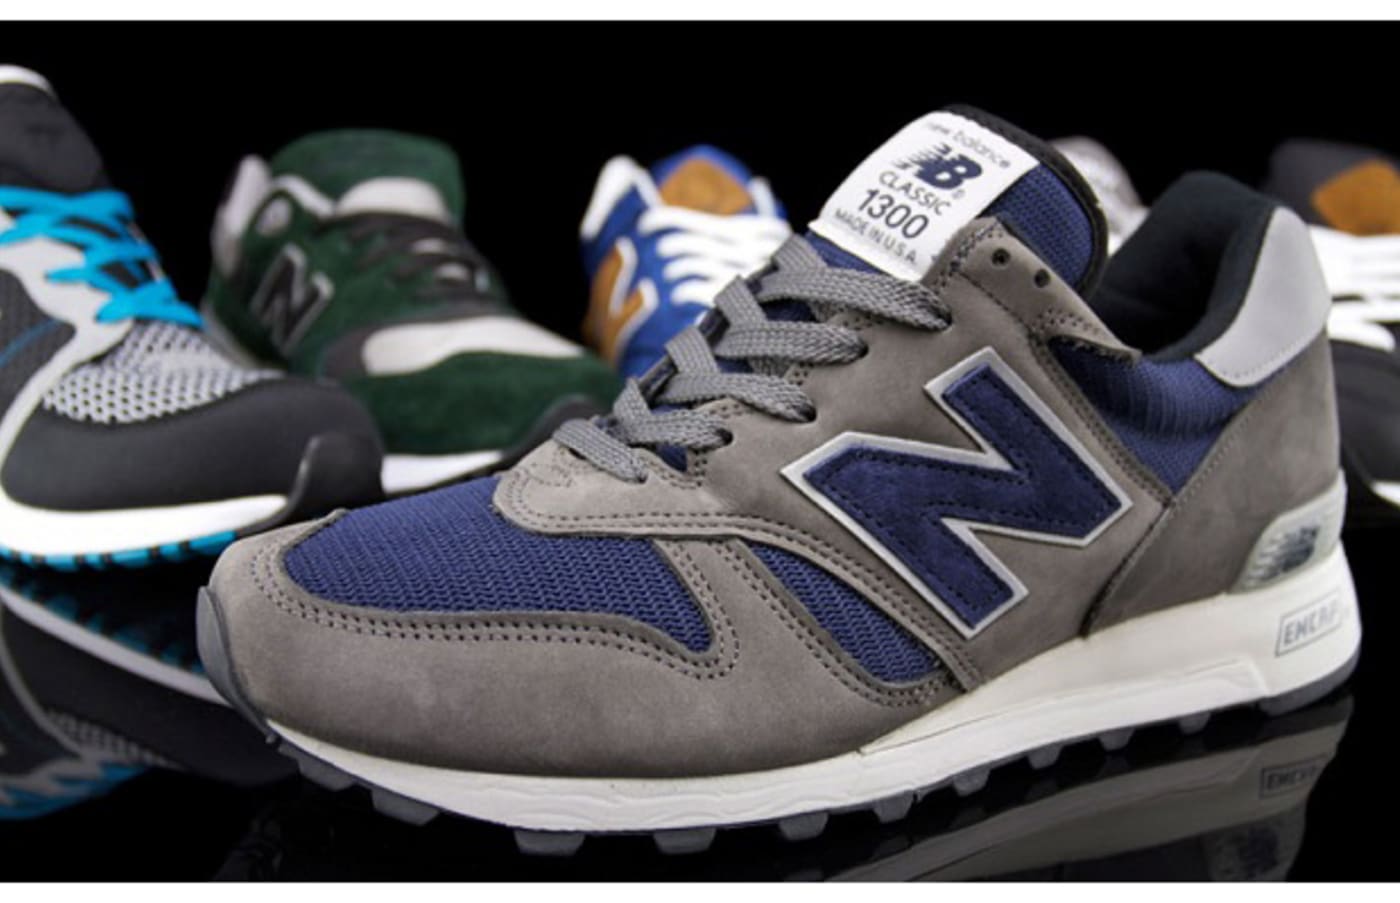 New Balance Fall Collection Complex